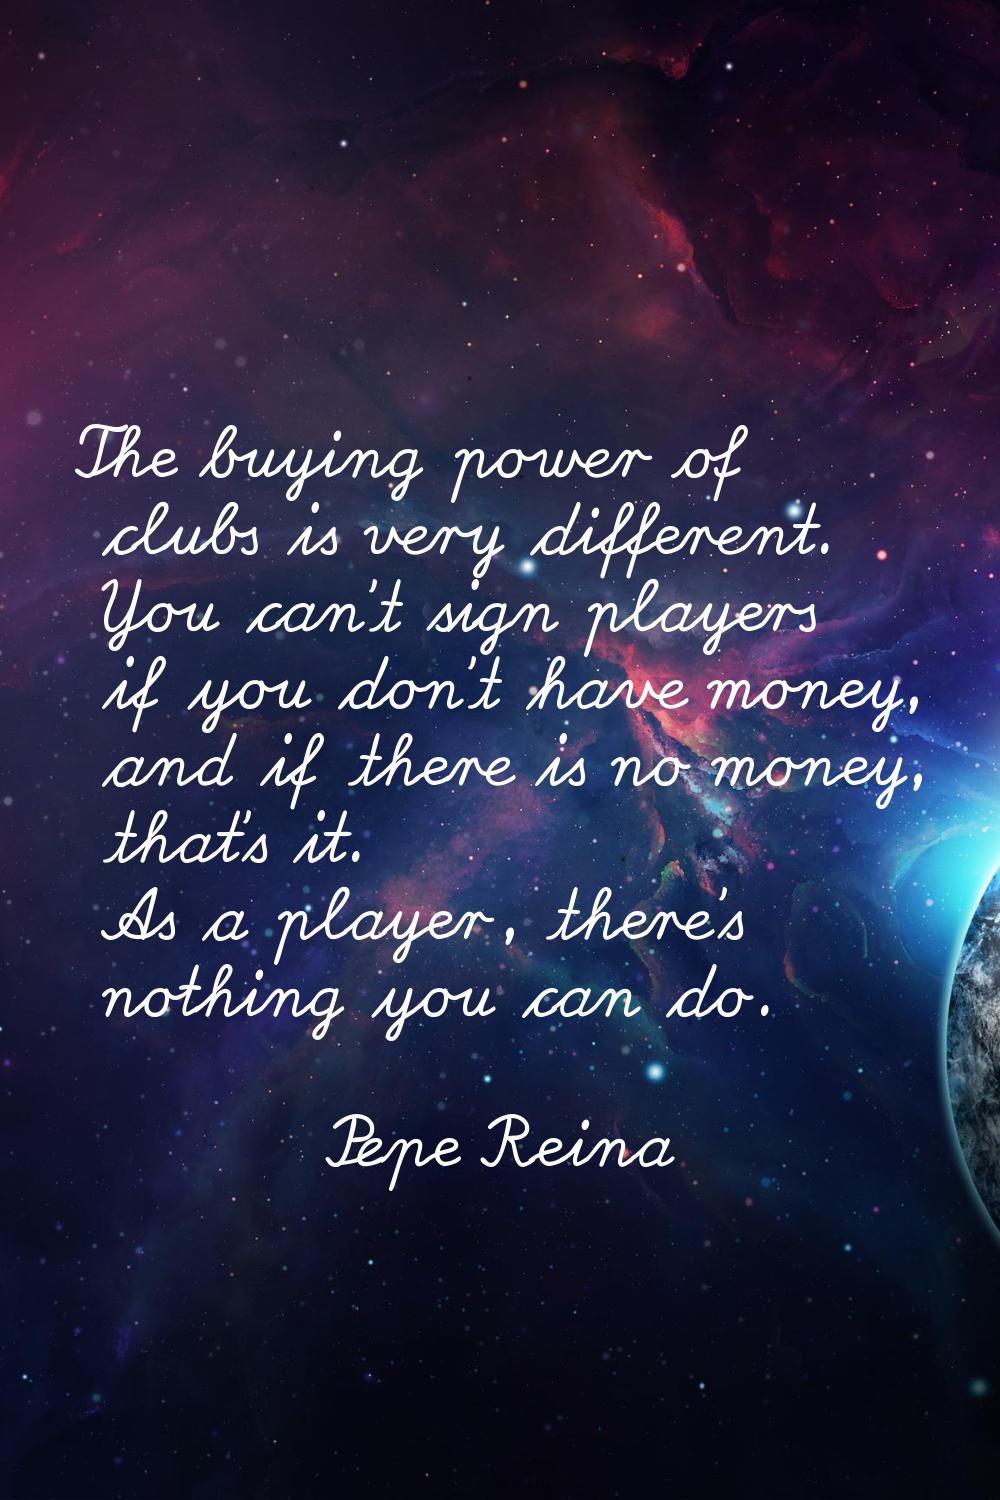 The buying power of clubs is very different. You can't sign players if you don't have money, and if